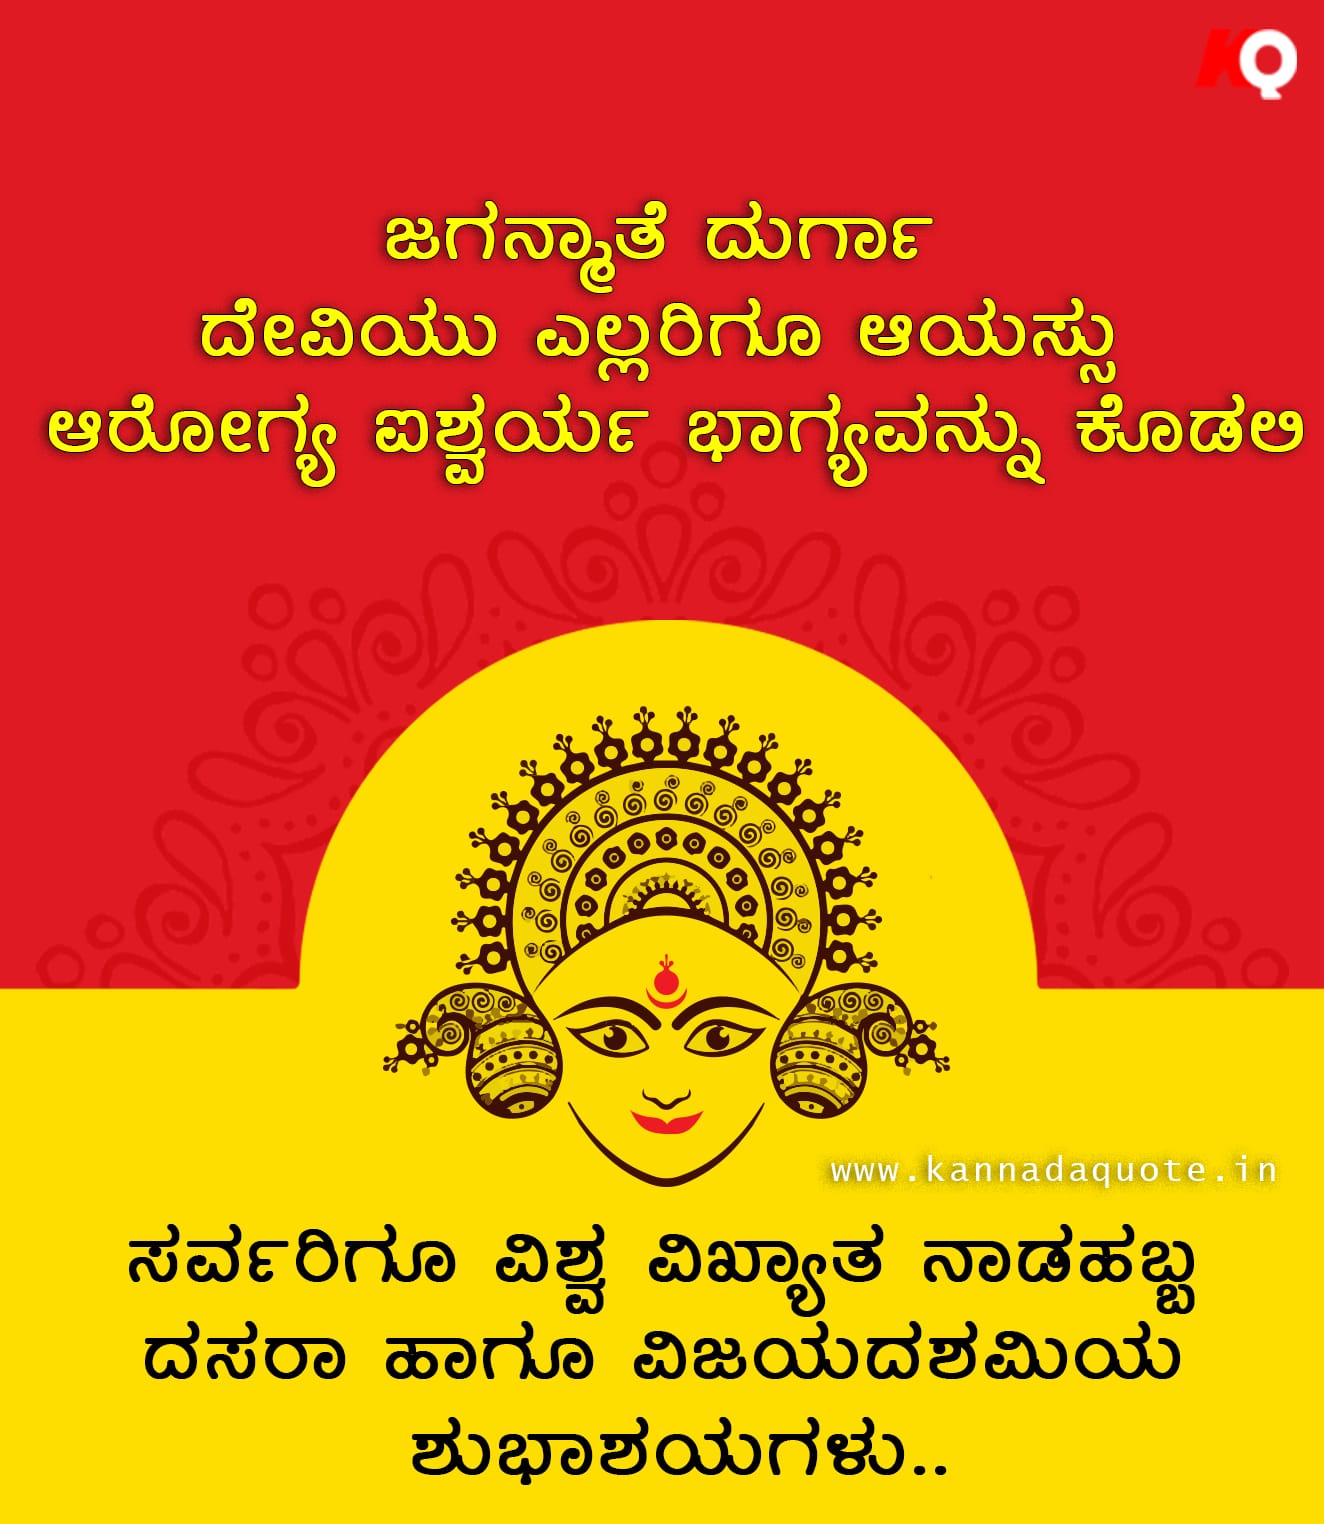 Quotes wishes for Happy Dasara in Kannada language